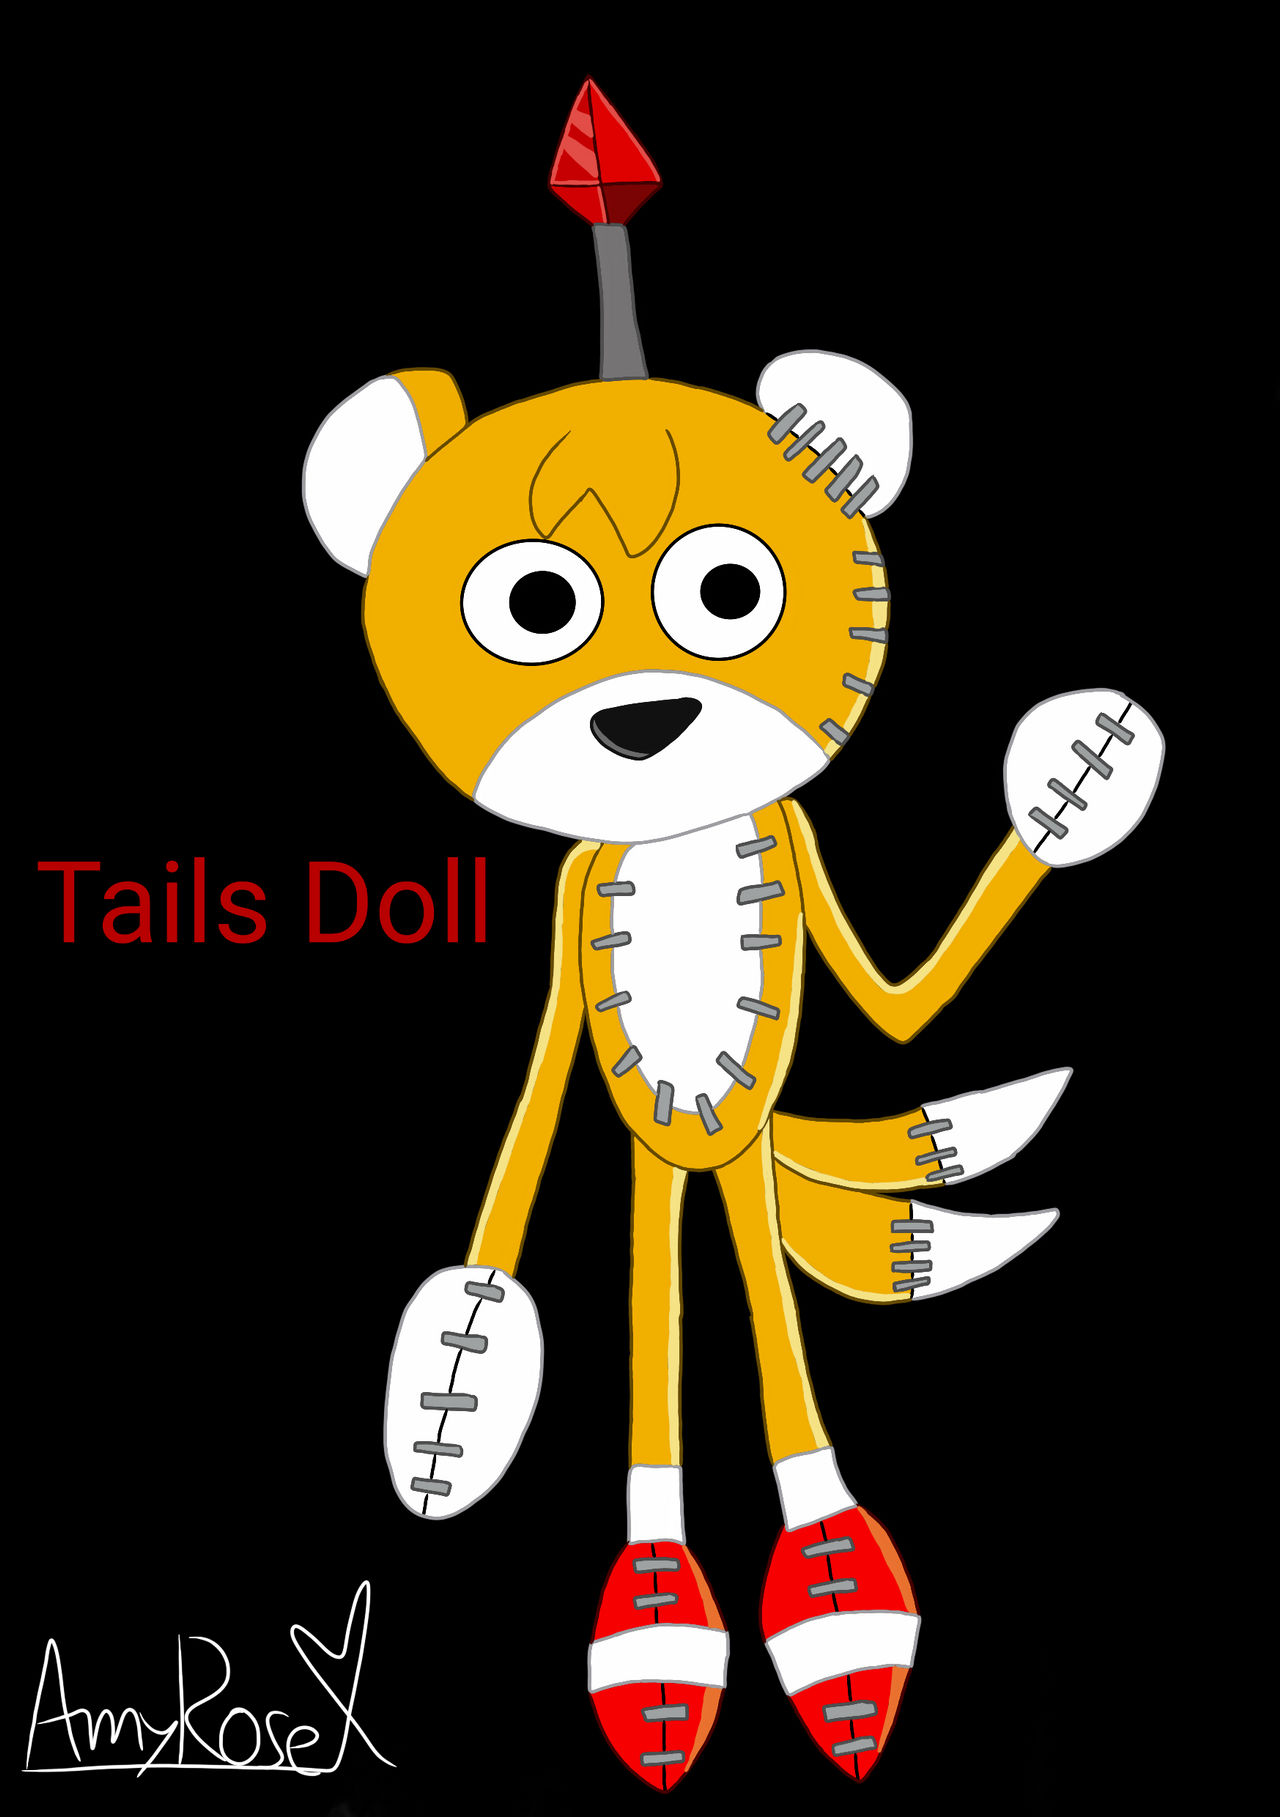 Tails Doll by ss2sonic on DeviantArt